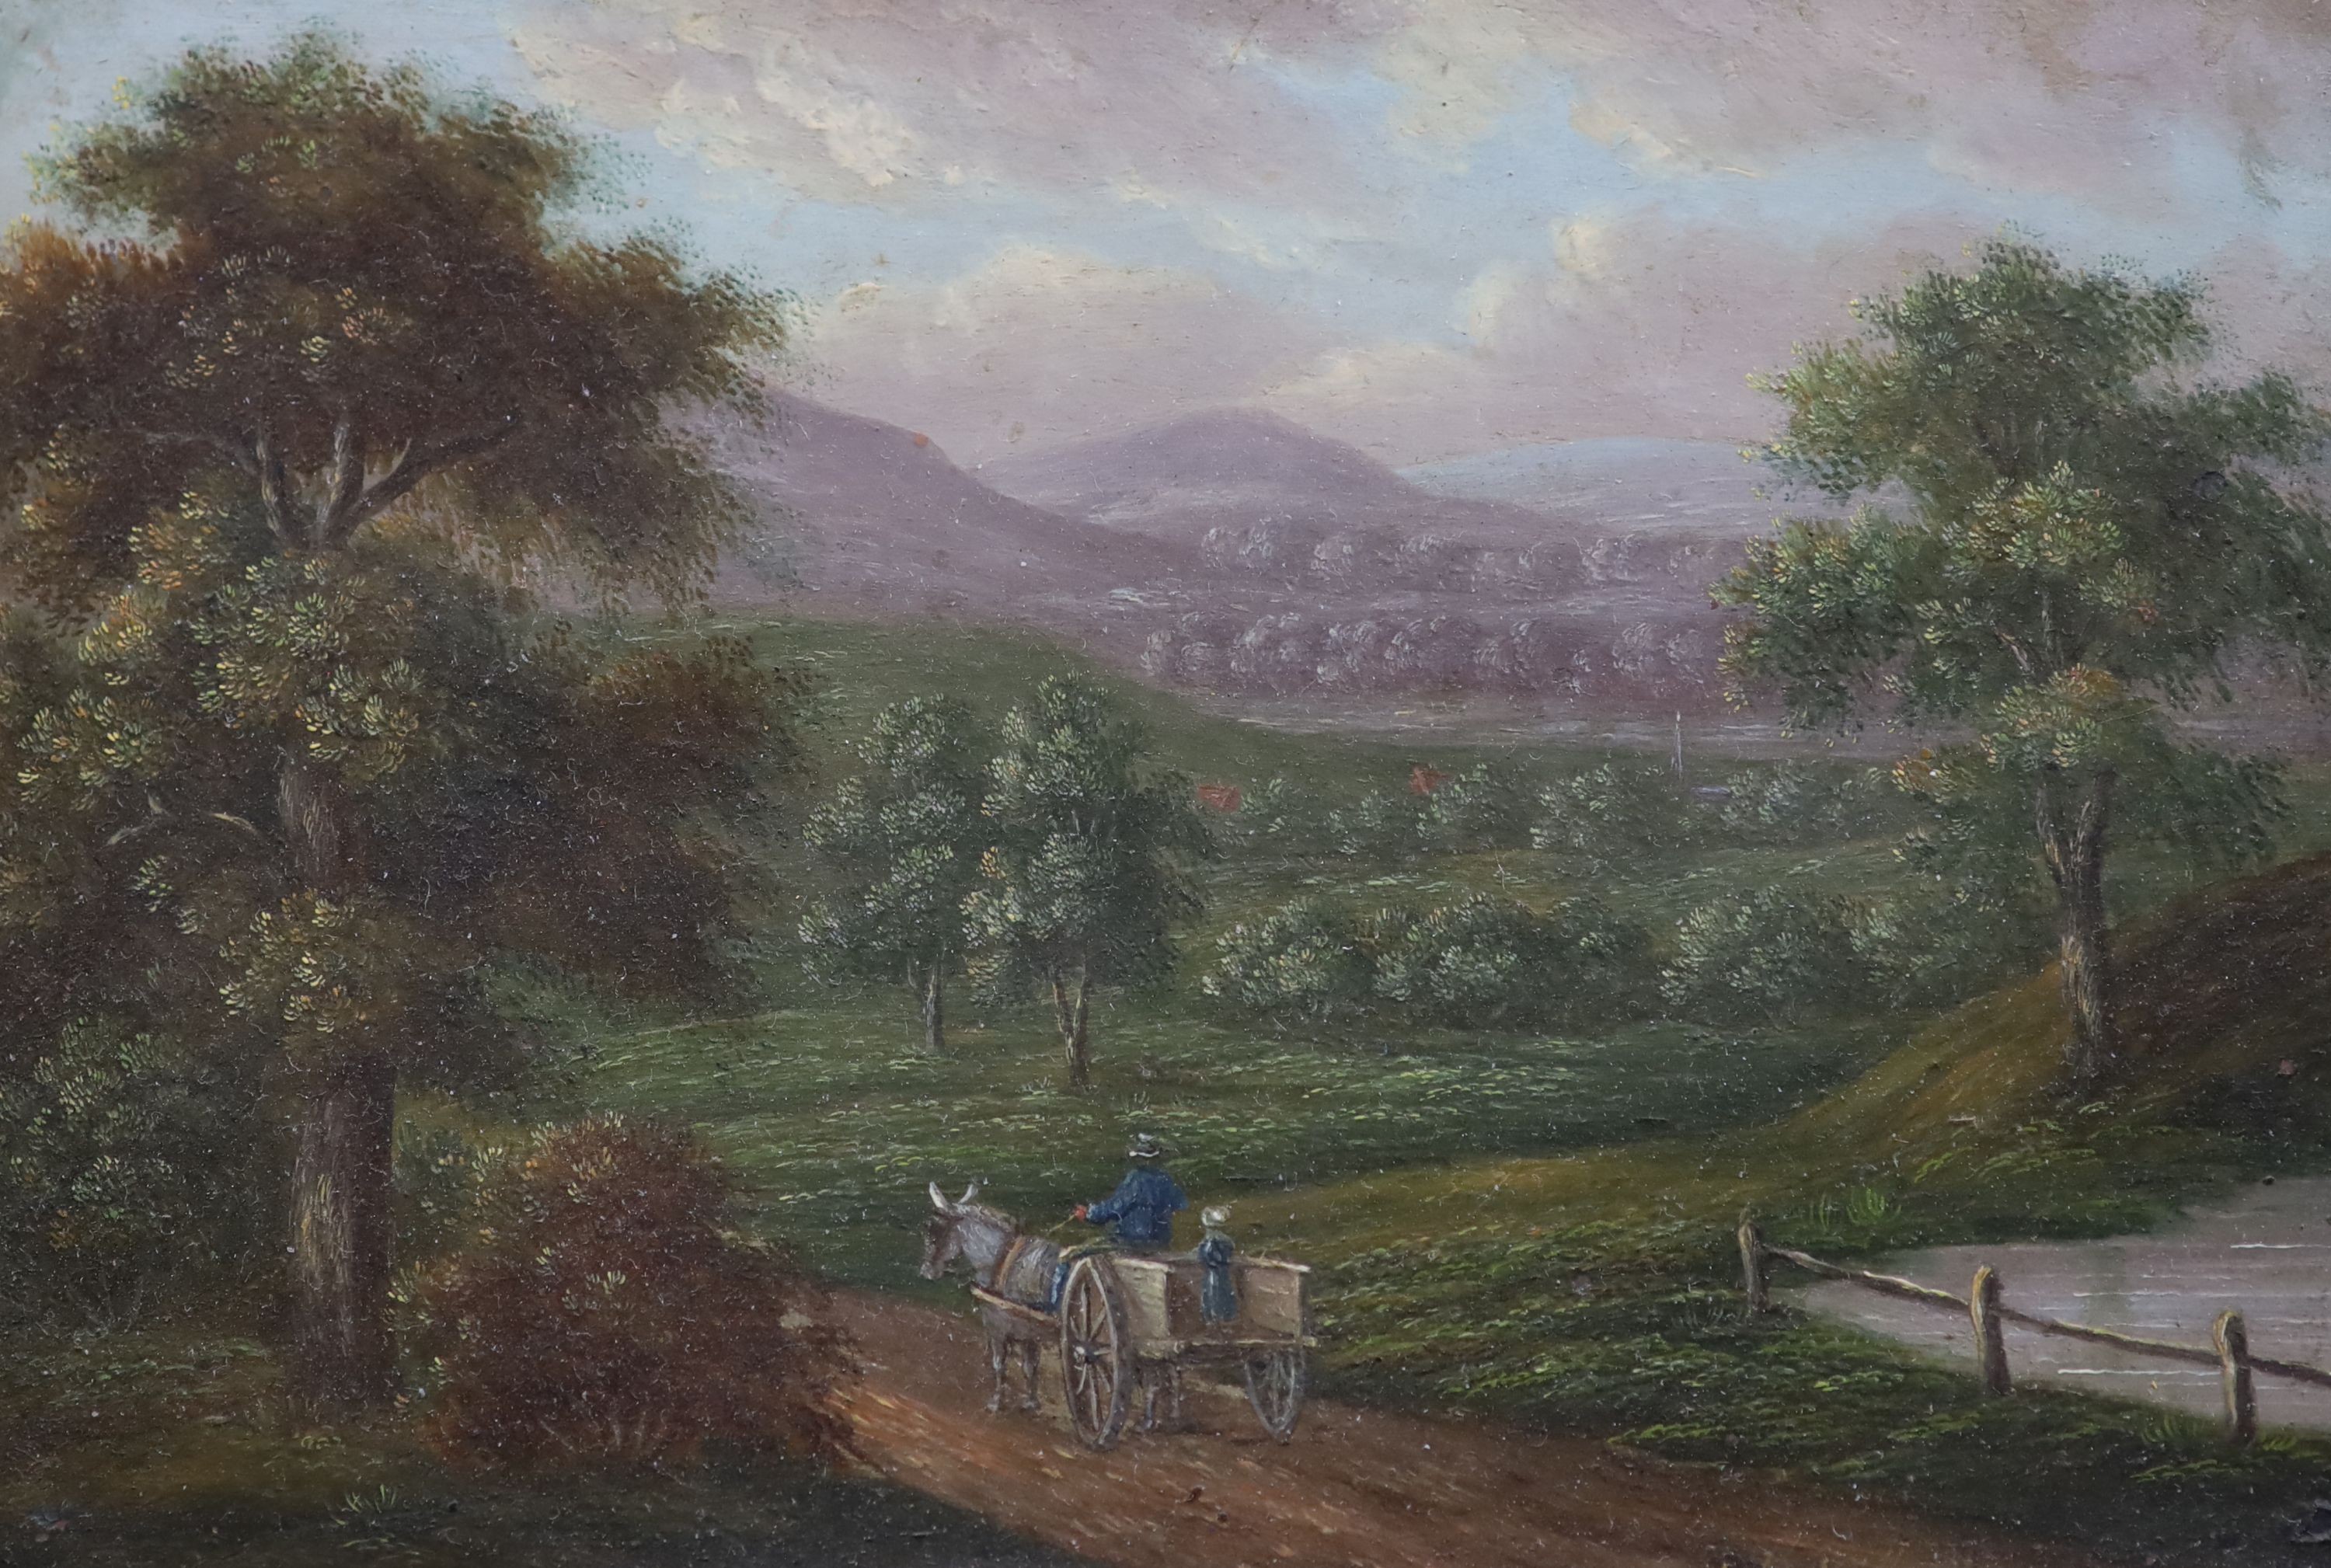 John Joshua Kirby (1716-1774), A Country Walk and A Lift Home, pair of oils on copper, 11 x 15cm